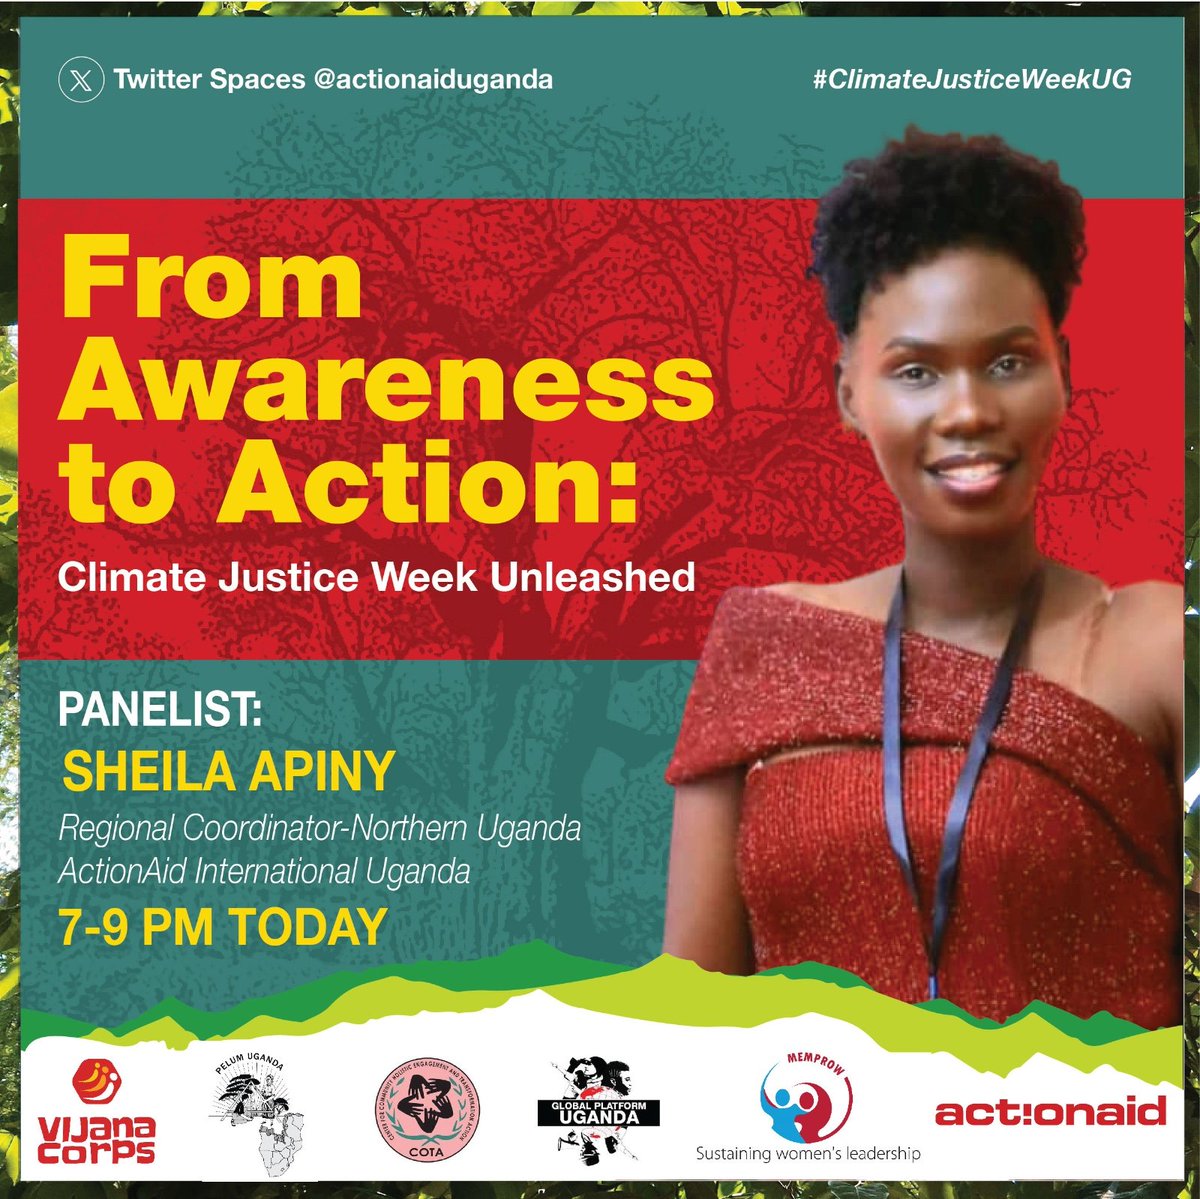 We need to unpack the climate change message to the layman despite it being a scientific issue!
#ClimateJusticeUG
#FixTheFinance
@sheila17 
@actionaiduganda 
@MEMPROWUganda 
@global_uganda